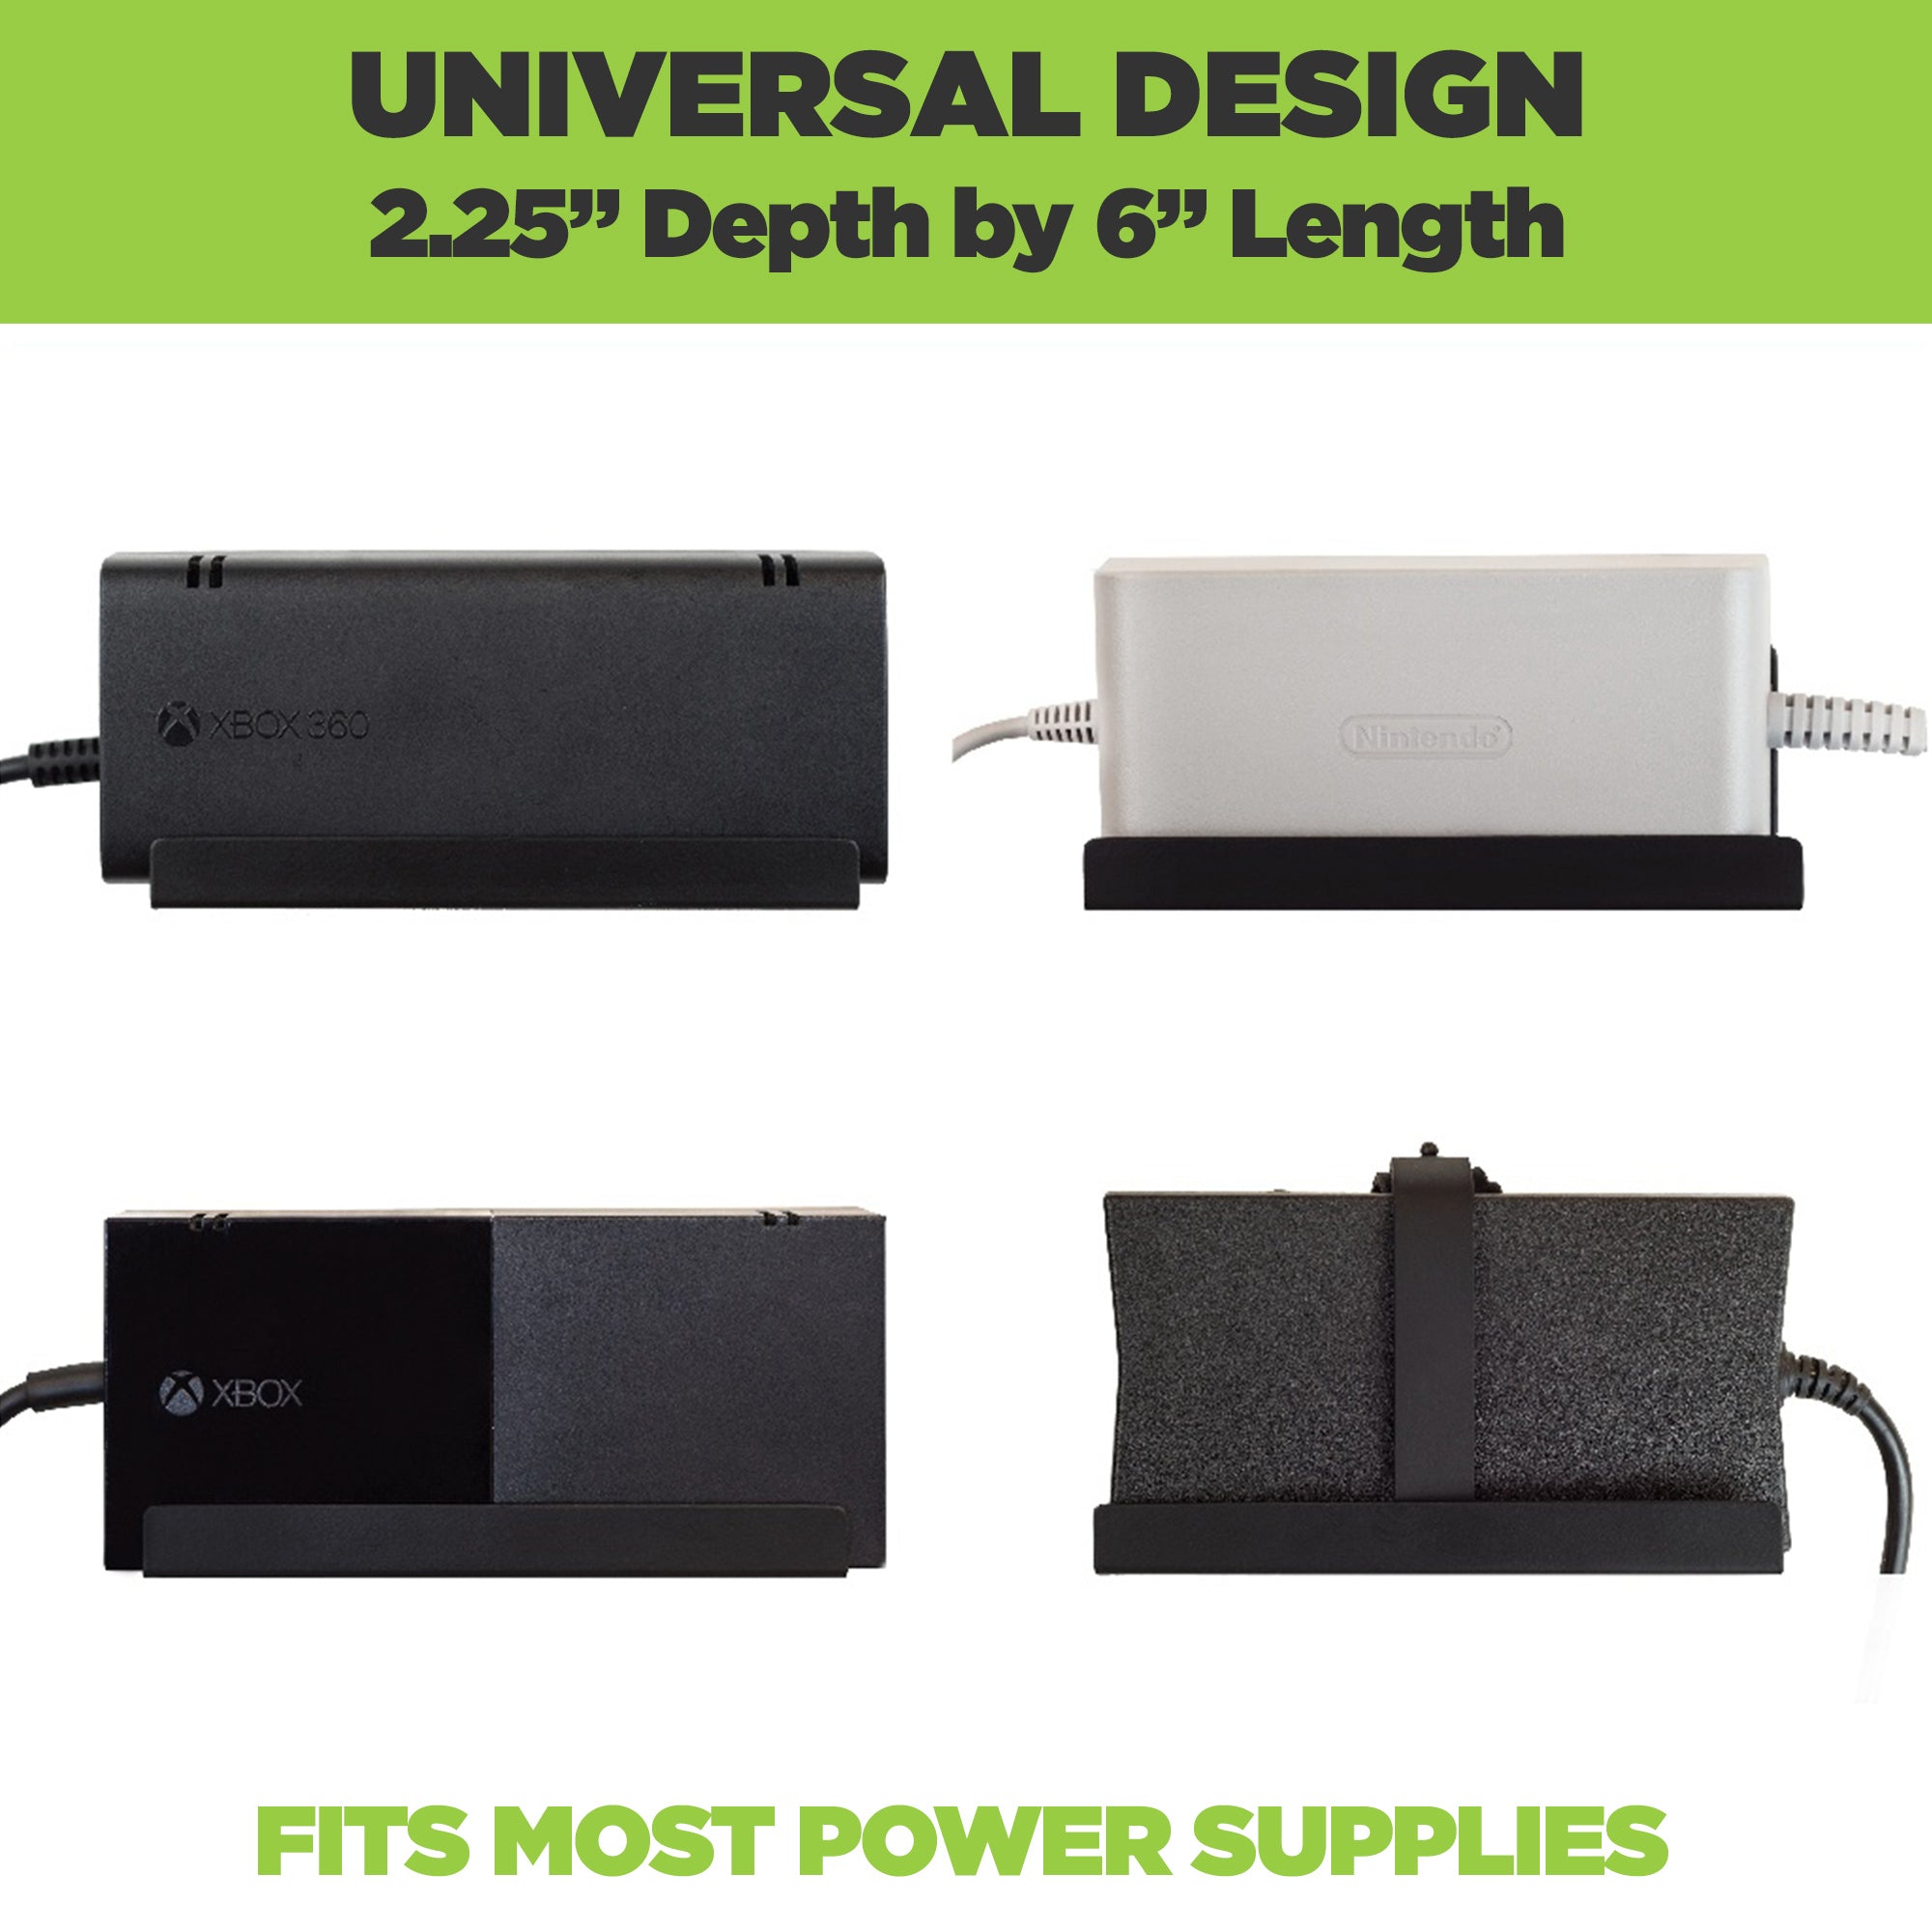 The HIDEit Power Brick Mount is designed to be universal so it fits most common power bricks.